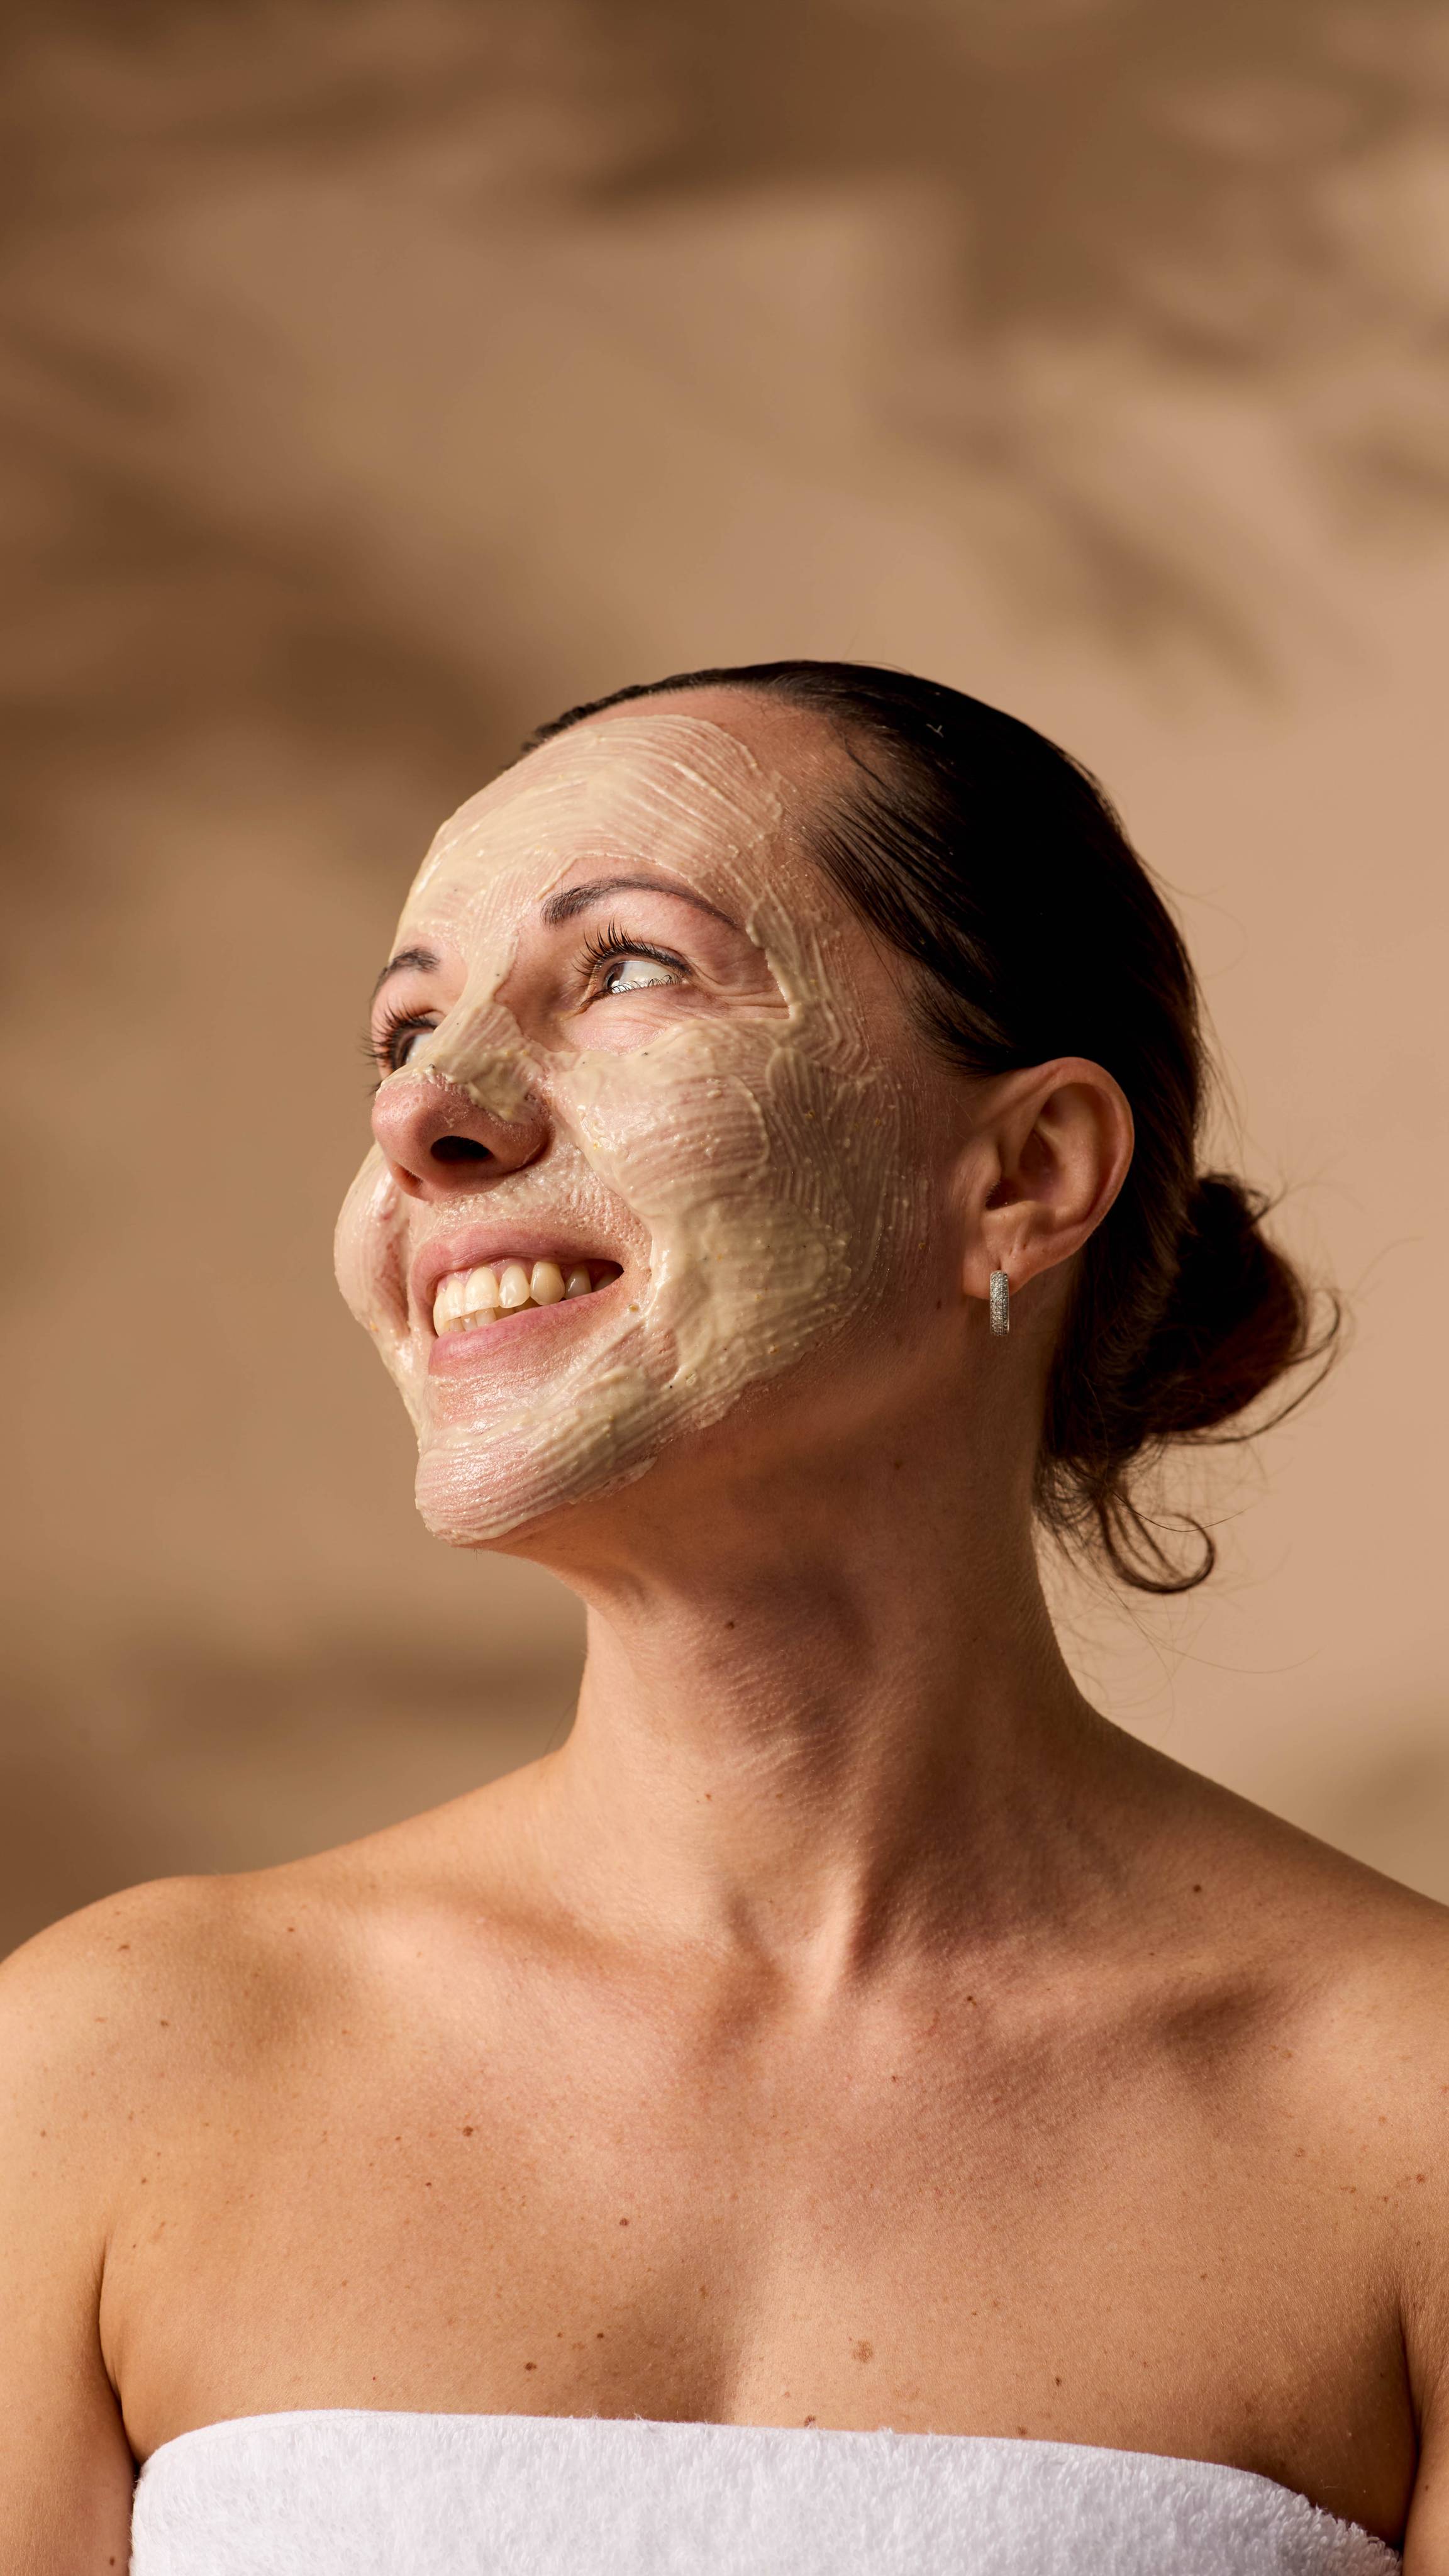 The model is wrapped in a fluffy, white towel, smiling into the distance with their face evenly coated in the Enzynamite face mask.